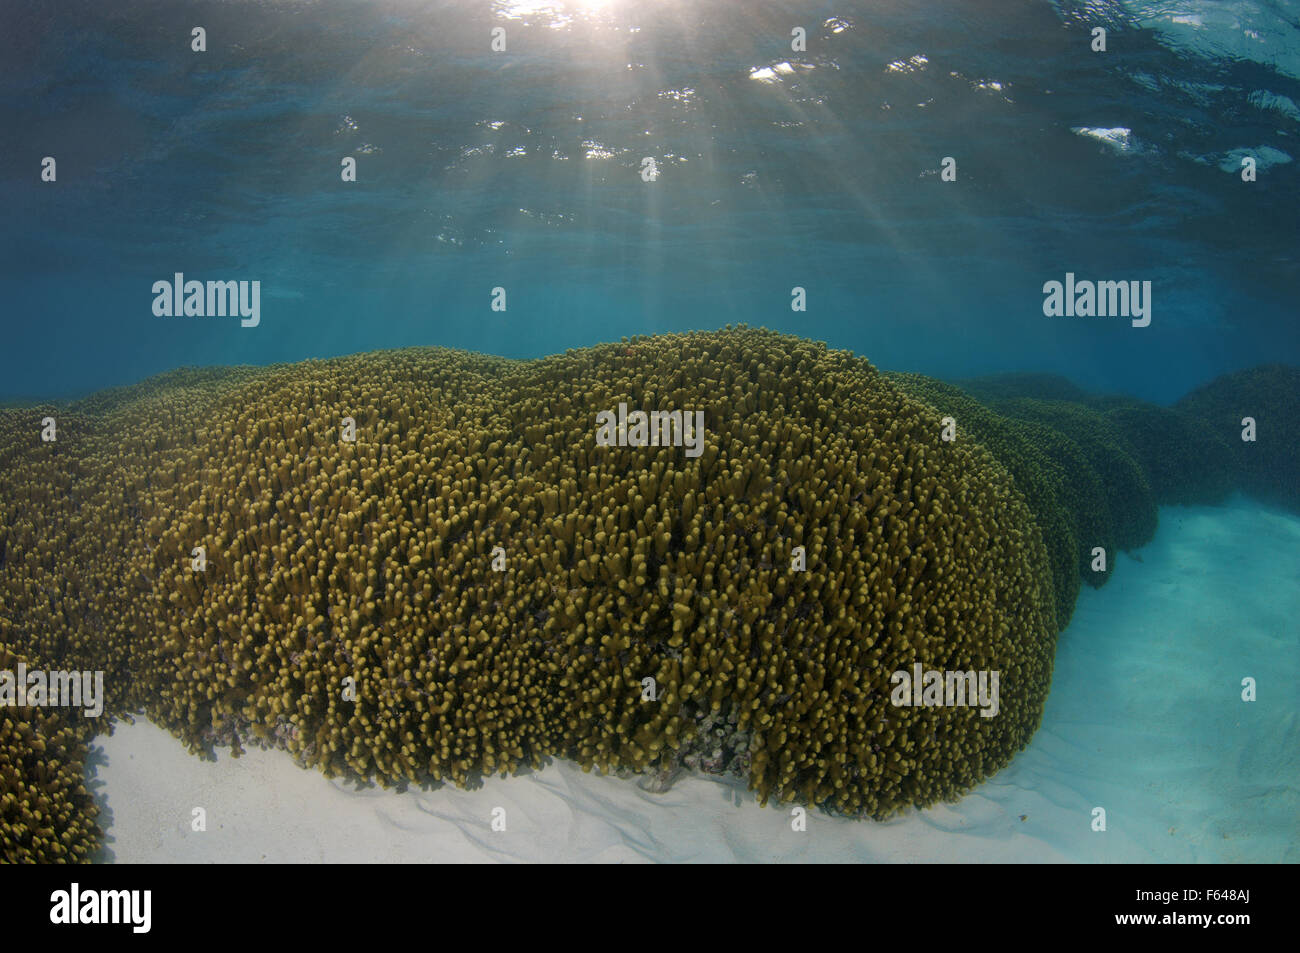 Jeweled Finger Coral (Porites cylindrica), Indian Ocean, Maldives Stock Photo